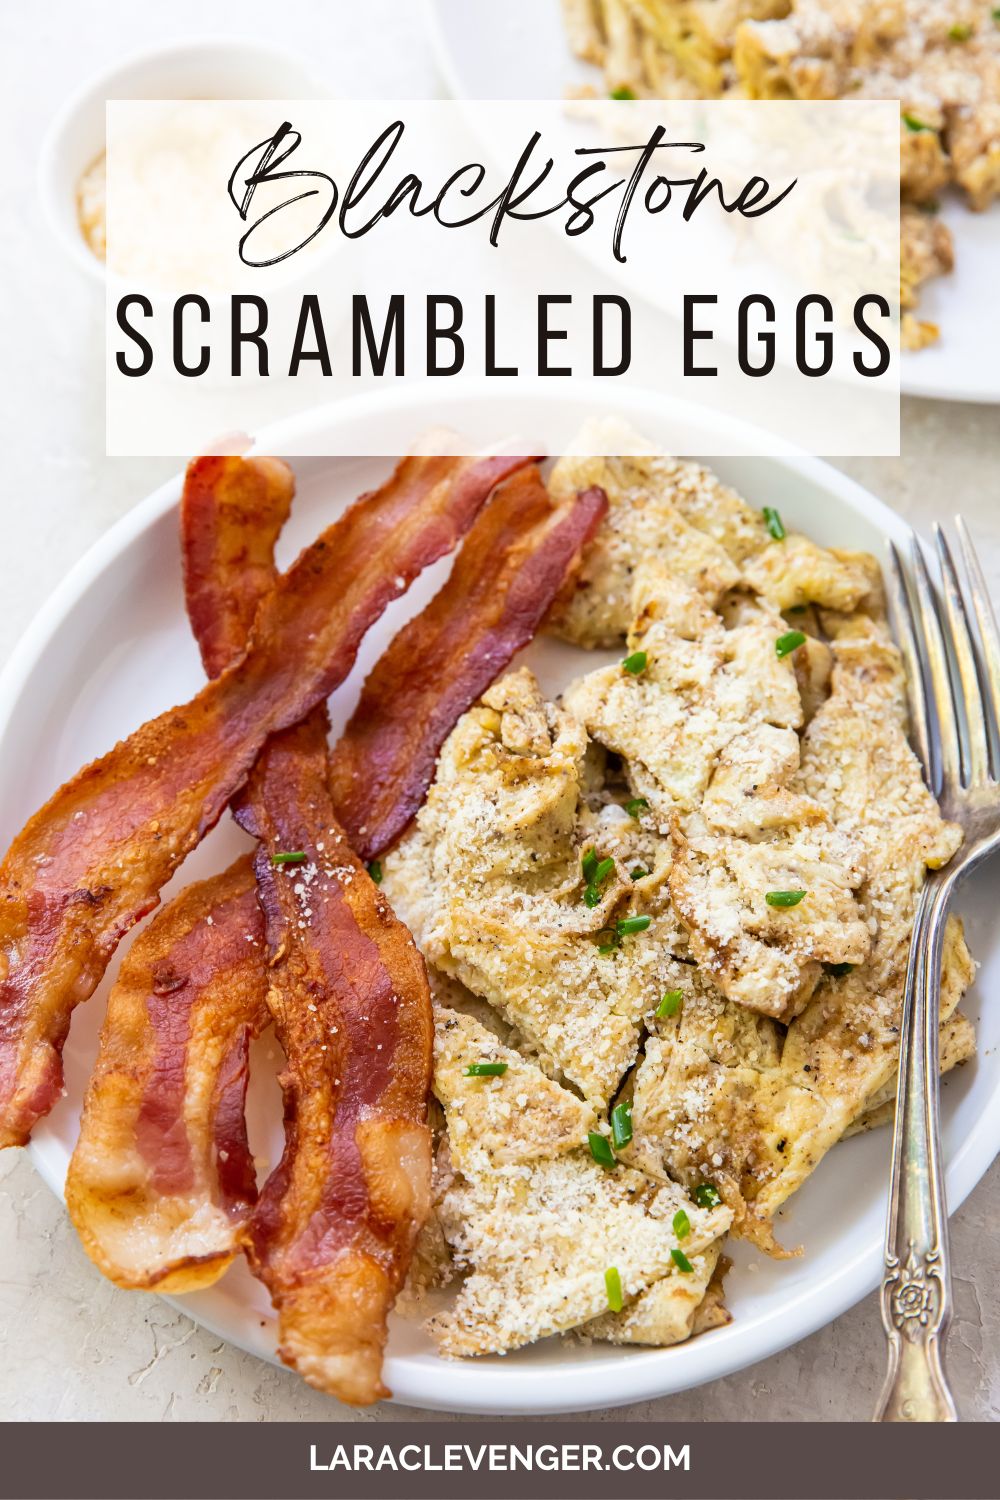 pin of scrambled eggs on white plate with bacon with a fork